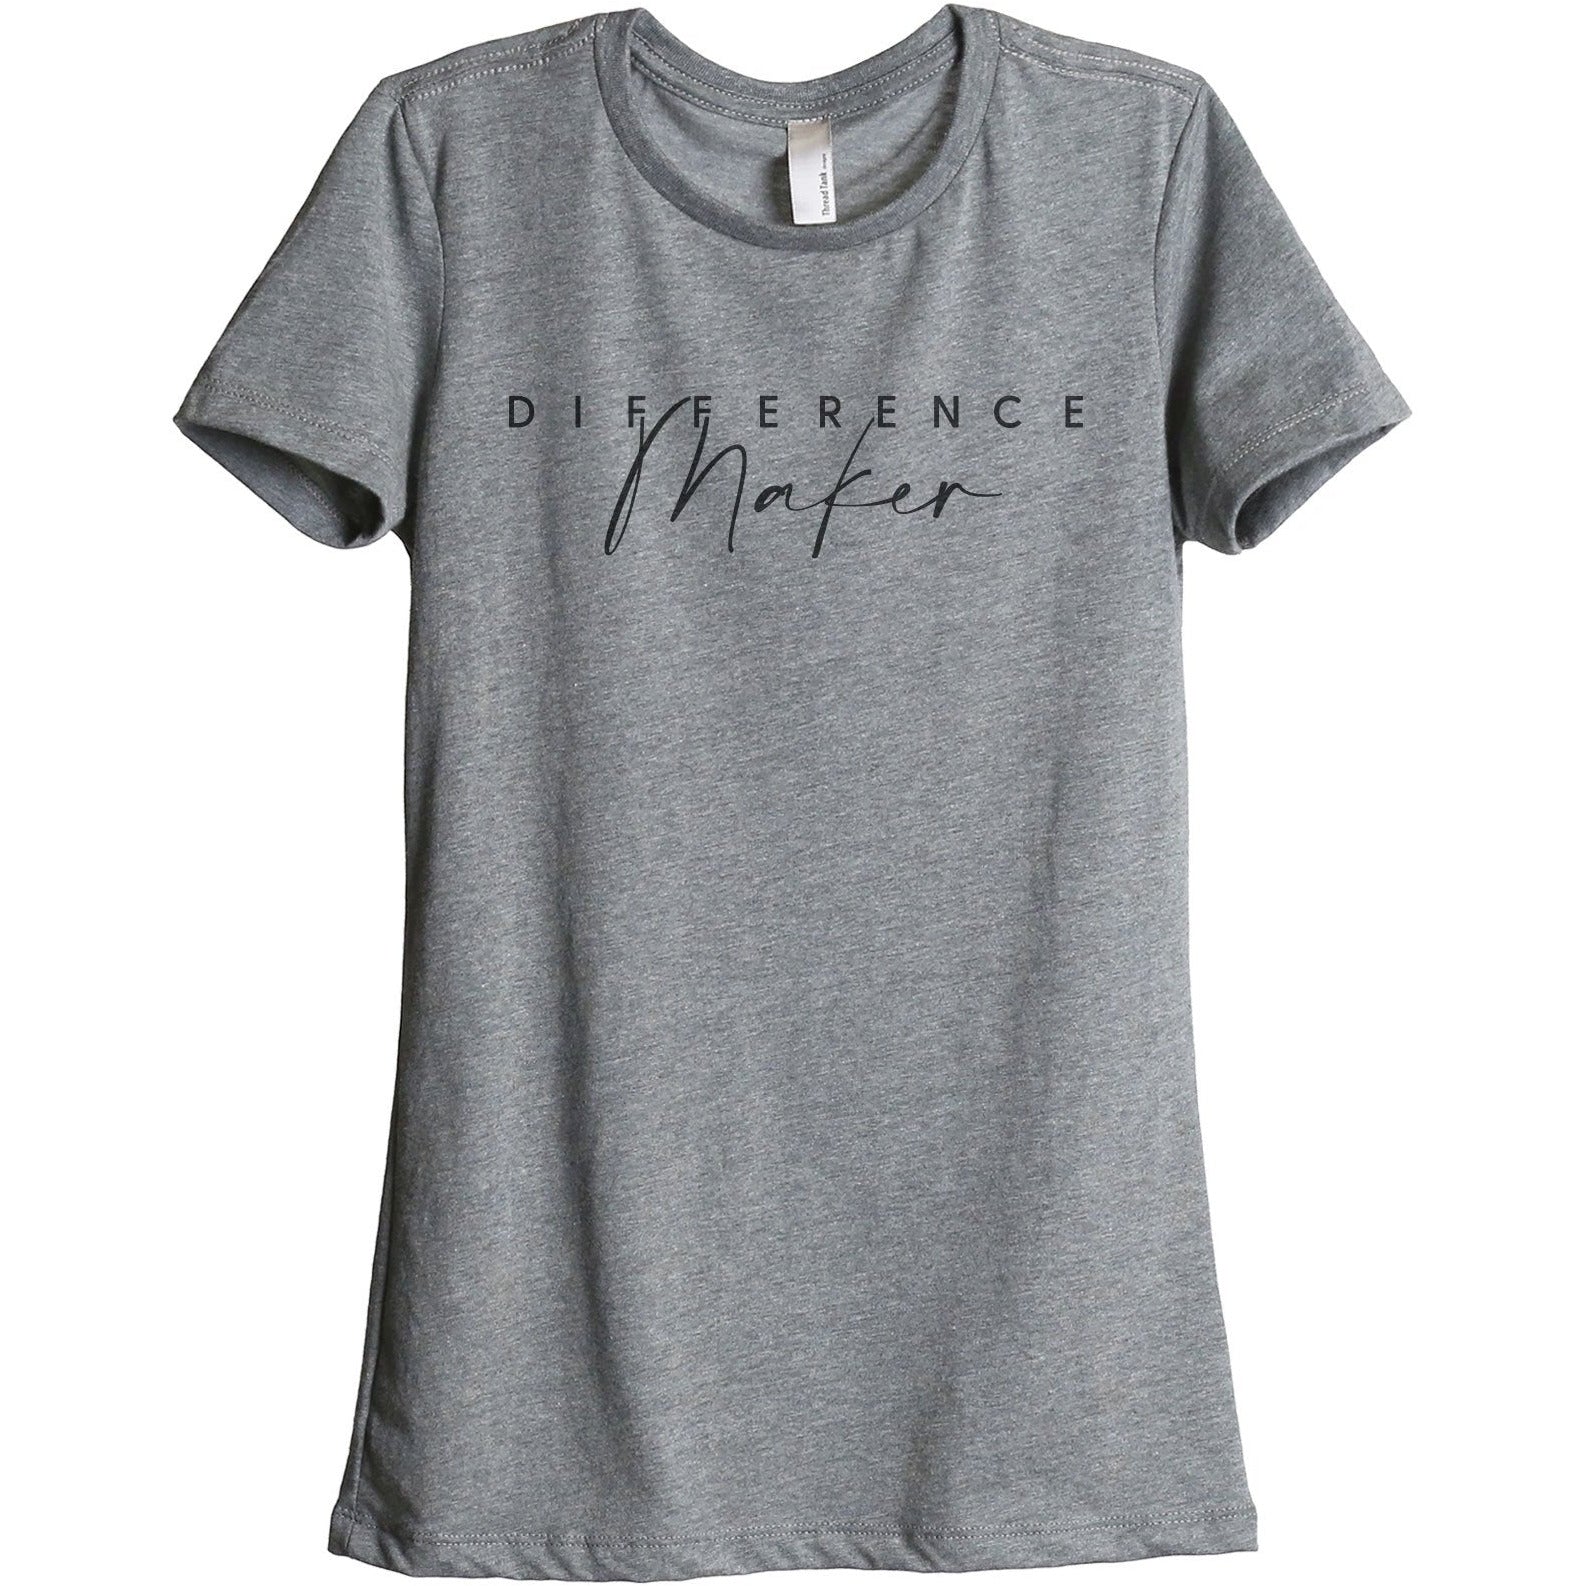 Difference Maker Women's Relaxed Crewneck T-Shirt Top Tee Heather Grey